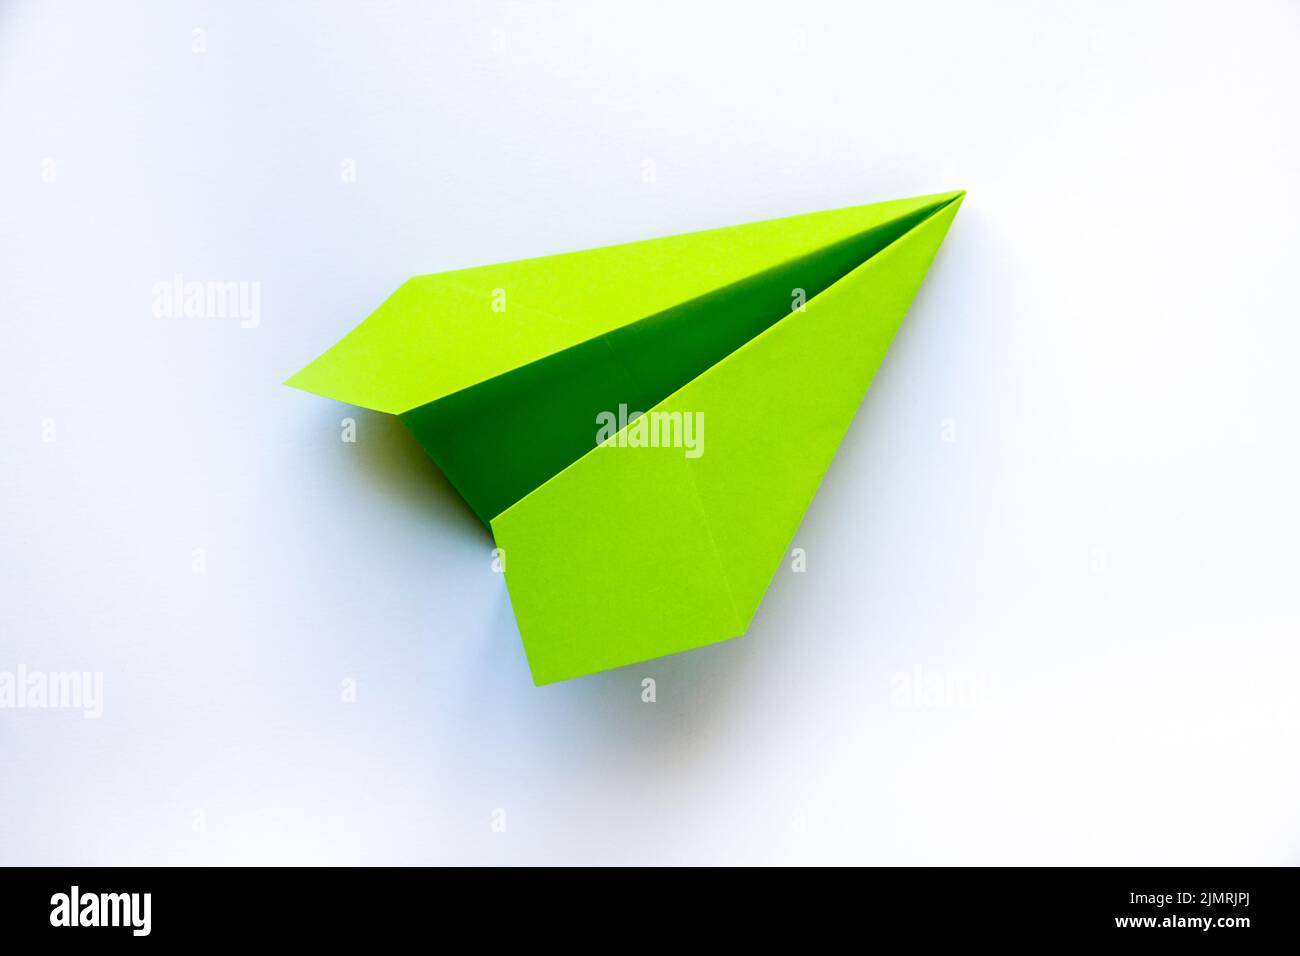 Green paper plane origami isolated on a white background Stock Photo